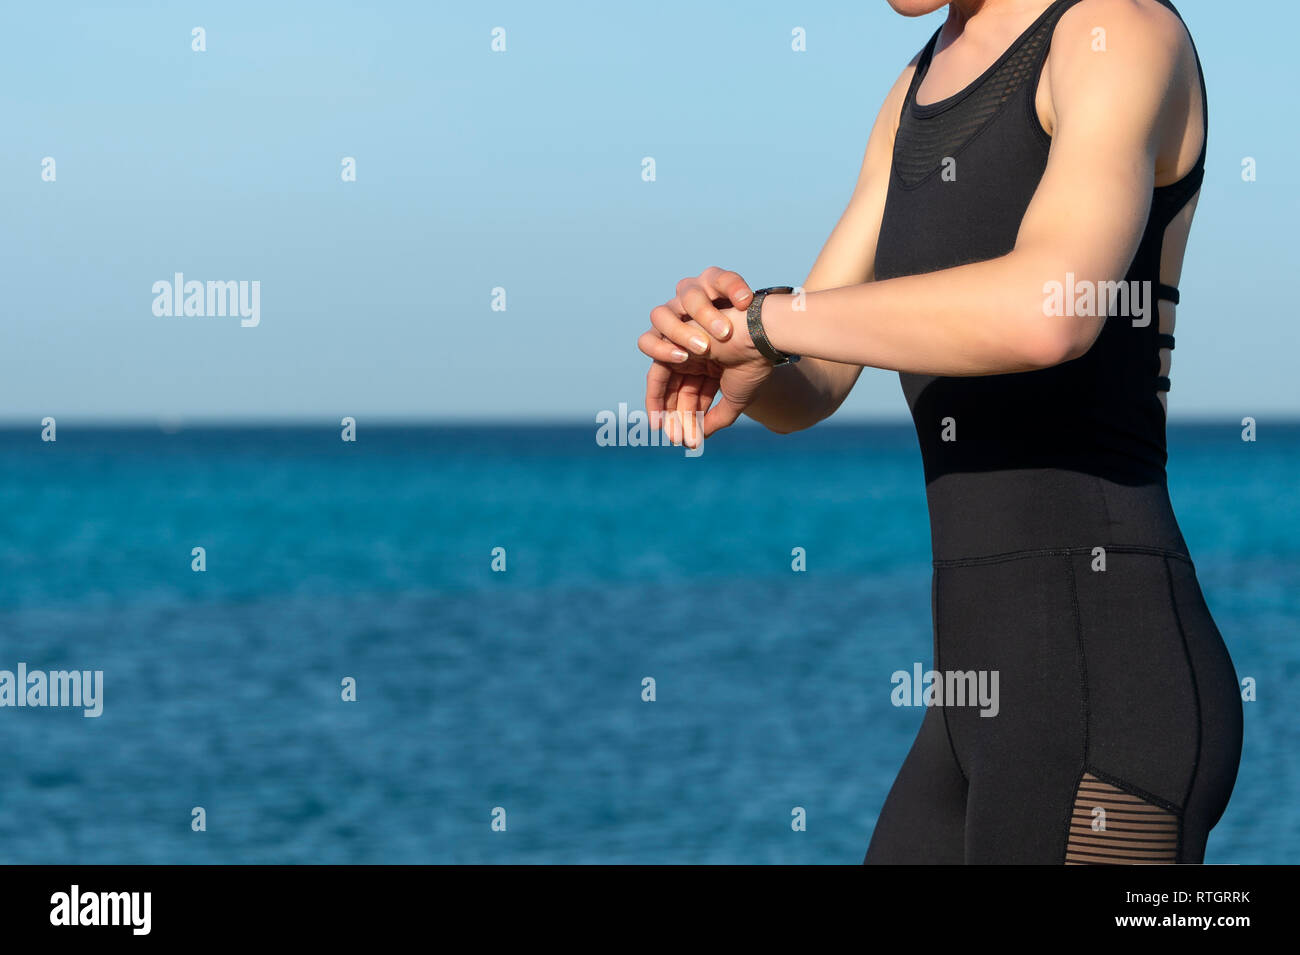 woman runner checking her fitbit, smart watch, close up Stock Photo